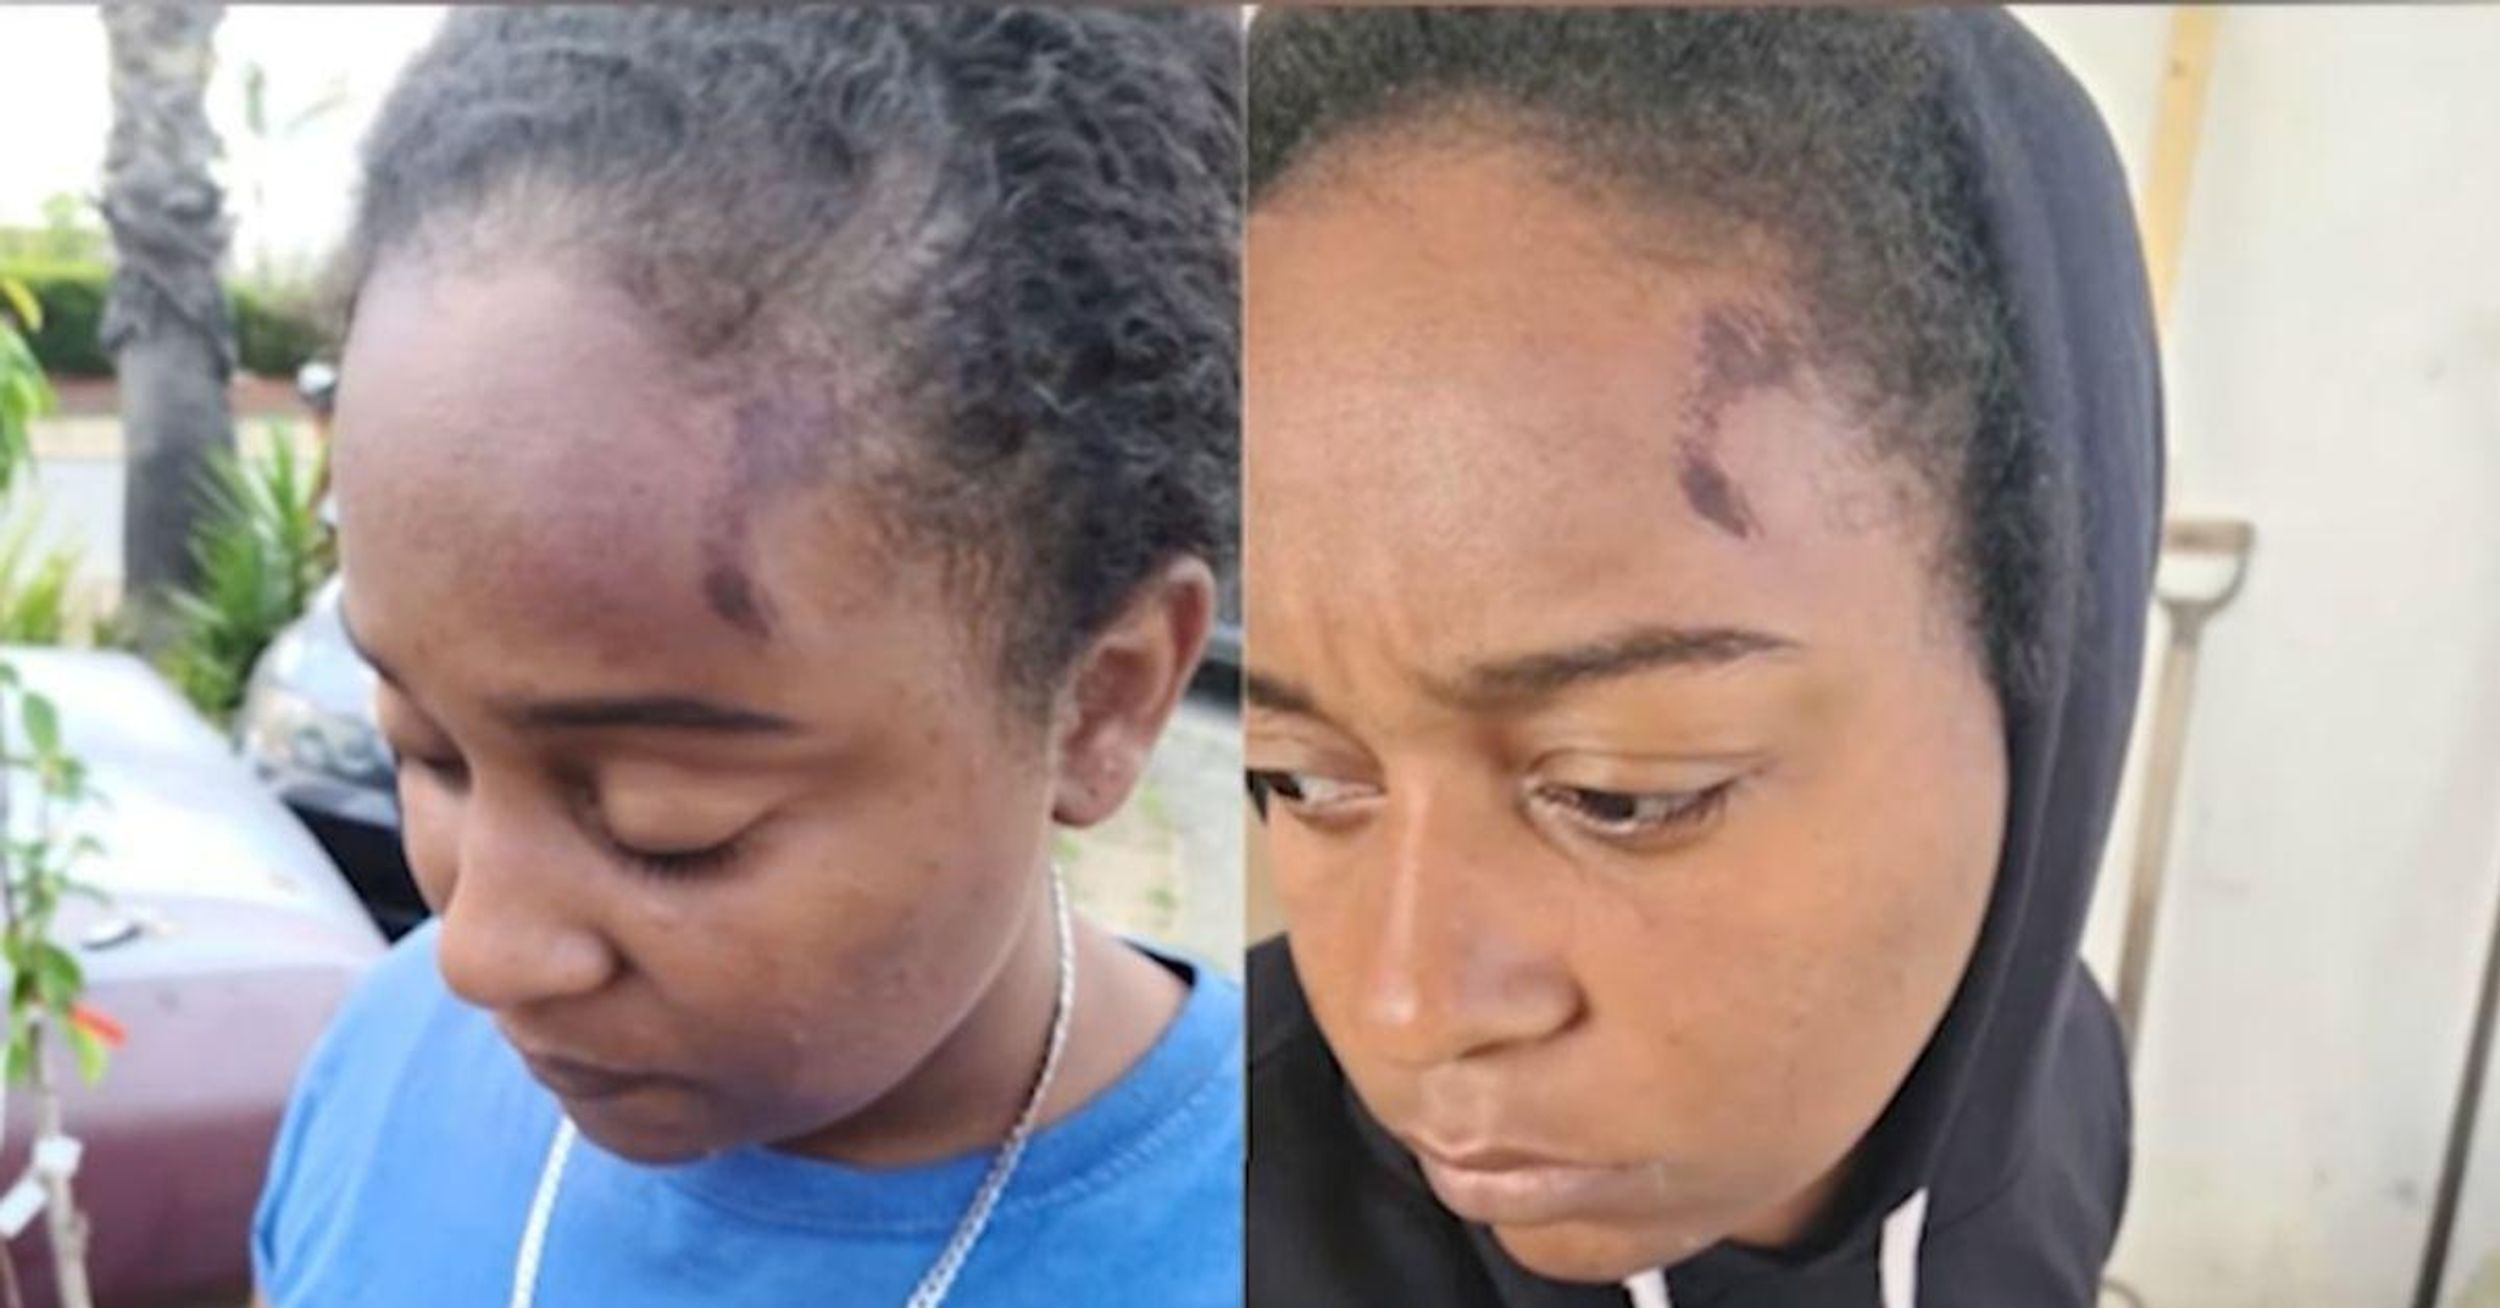 California Woman Sues After Cops Leave Her With Permanent Scars While She Filmed Arrest Happening In Her Yard